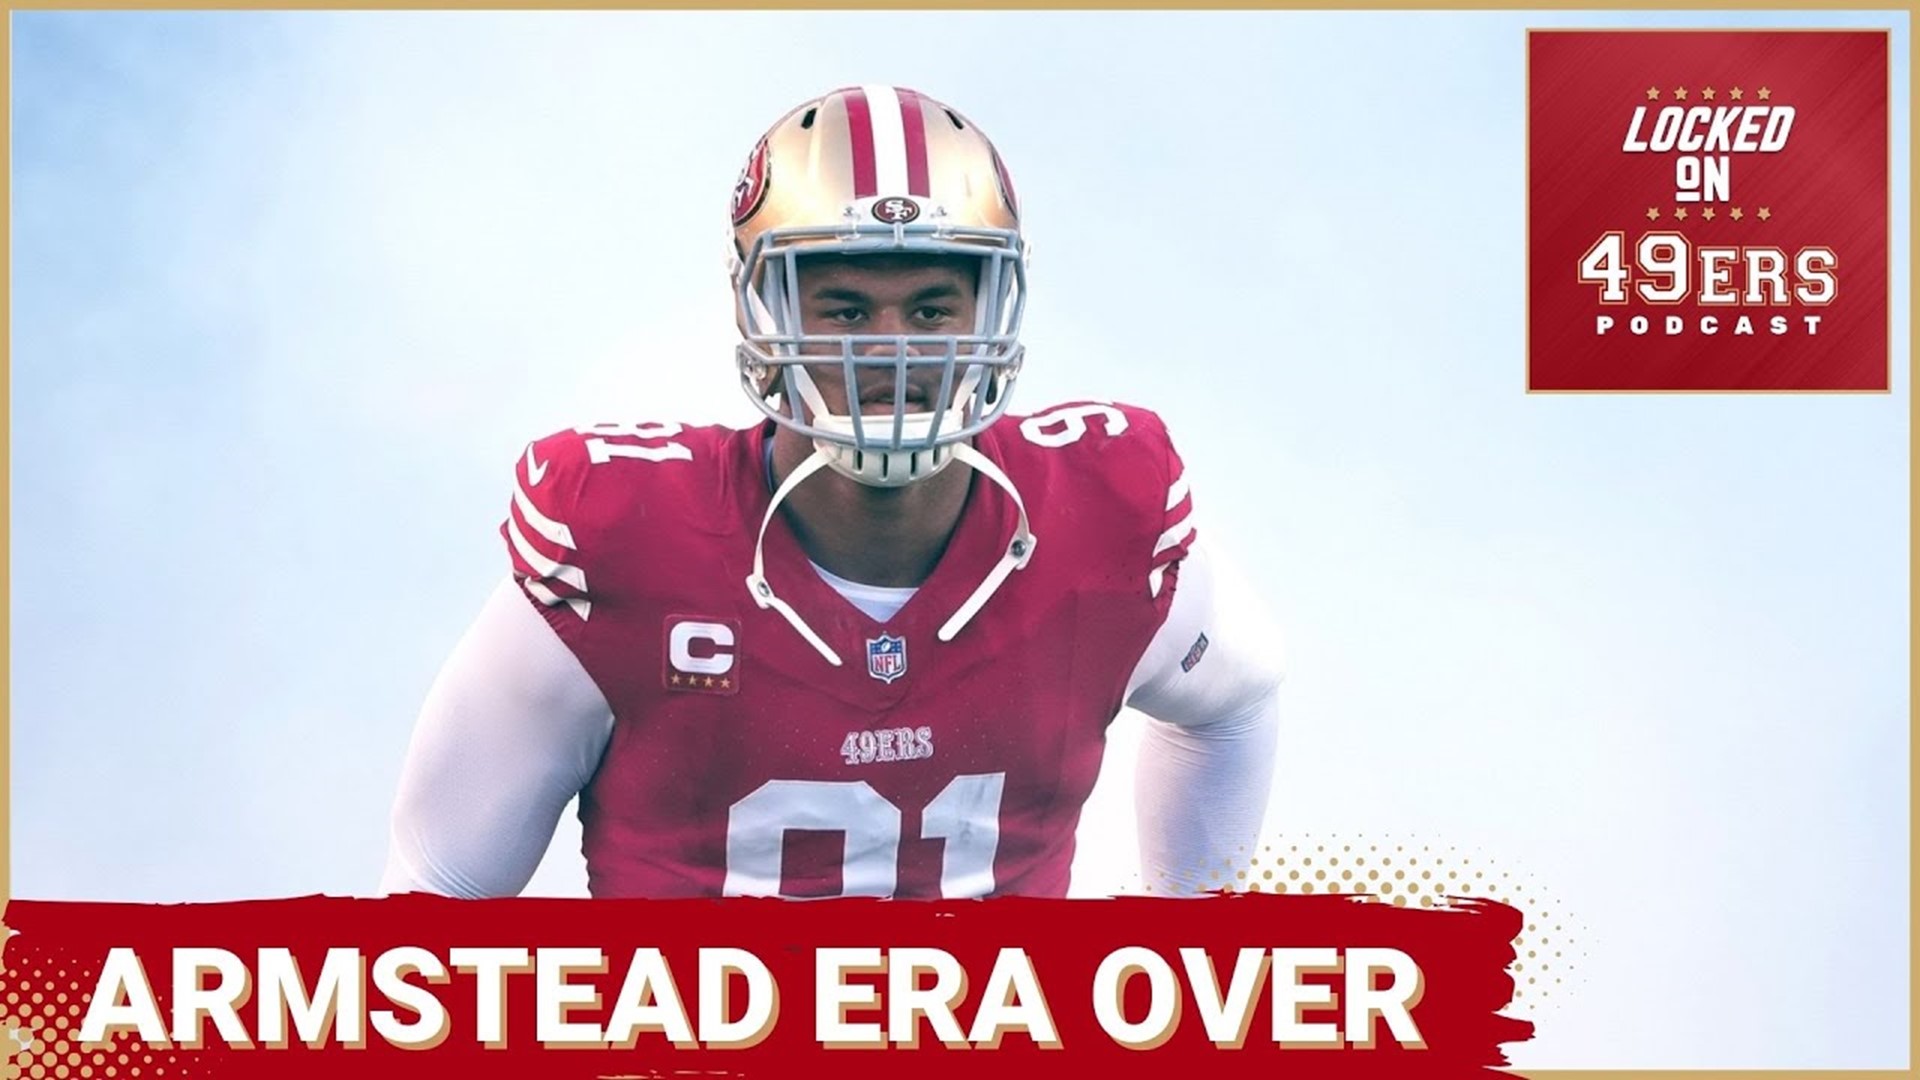 Arik Armstead could be a salary cap casualty, according to reports. Will the 49ers make a splash in free agency?